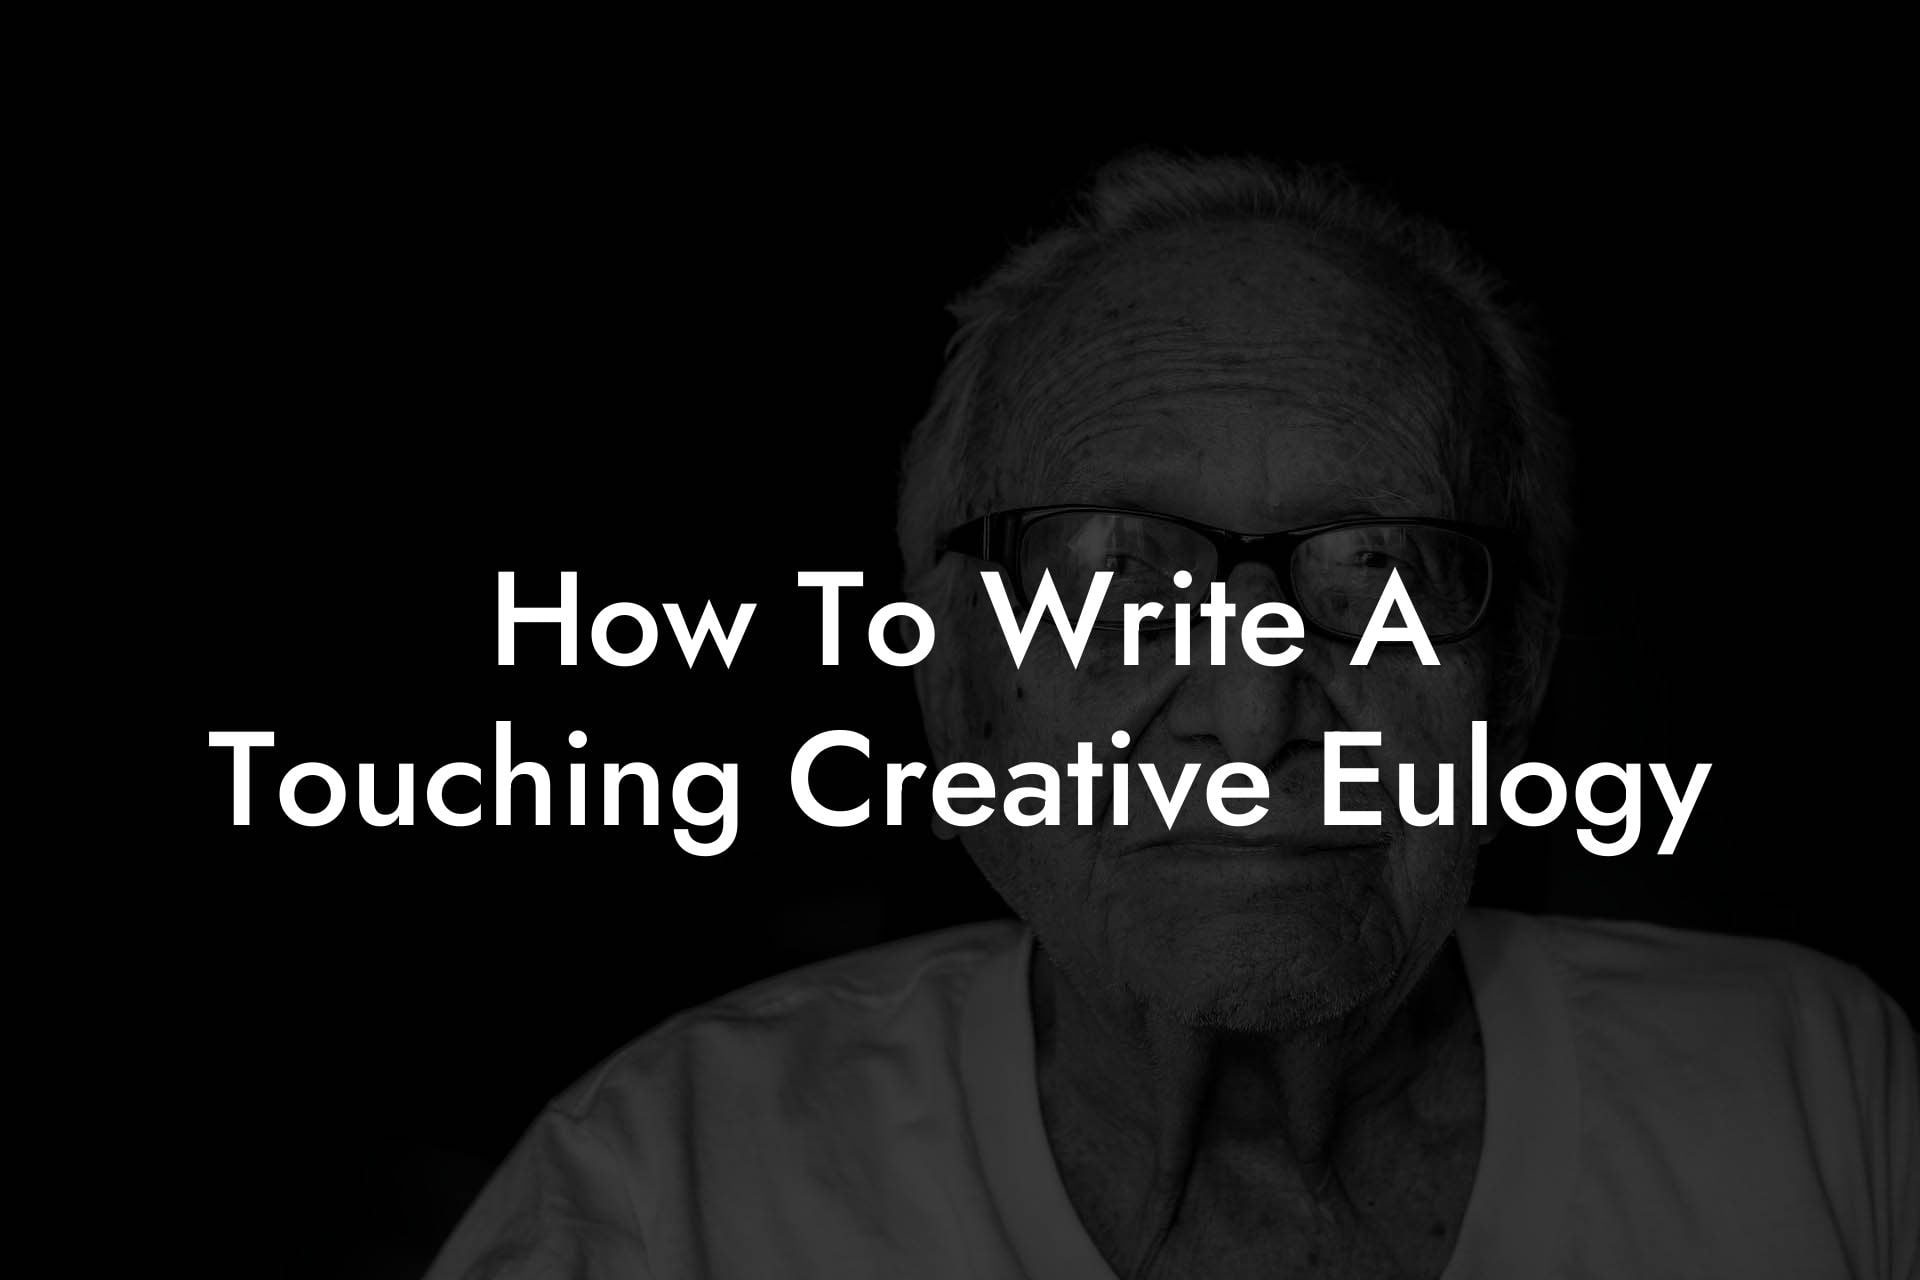 How To Write A Touching Creative Eulogy